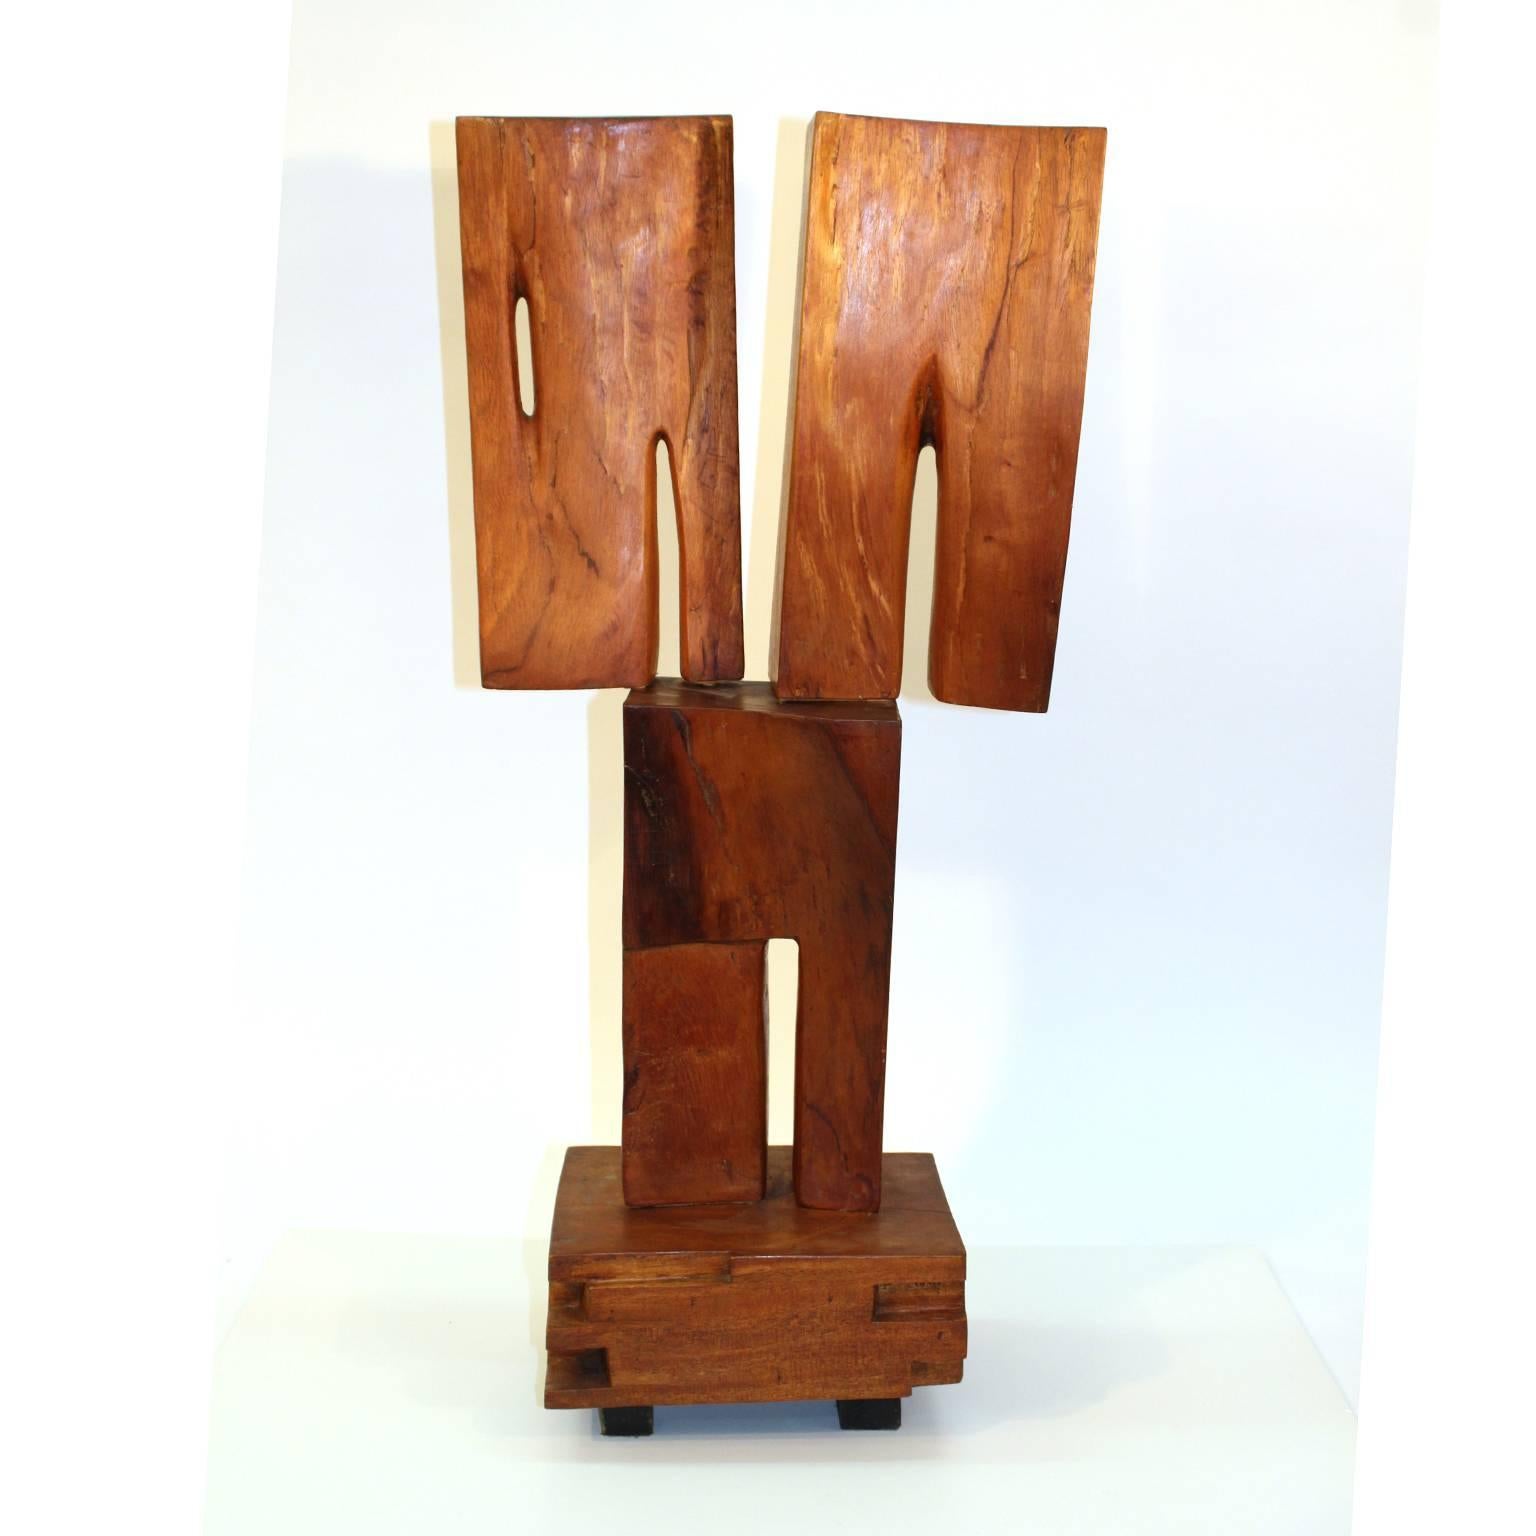 Bronka Stern 'The Shrine' Midcentury Constructivist Spiritual Wood Sculpture In Good Condition For Sale In New York, NY